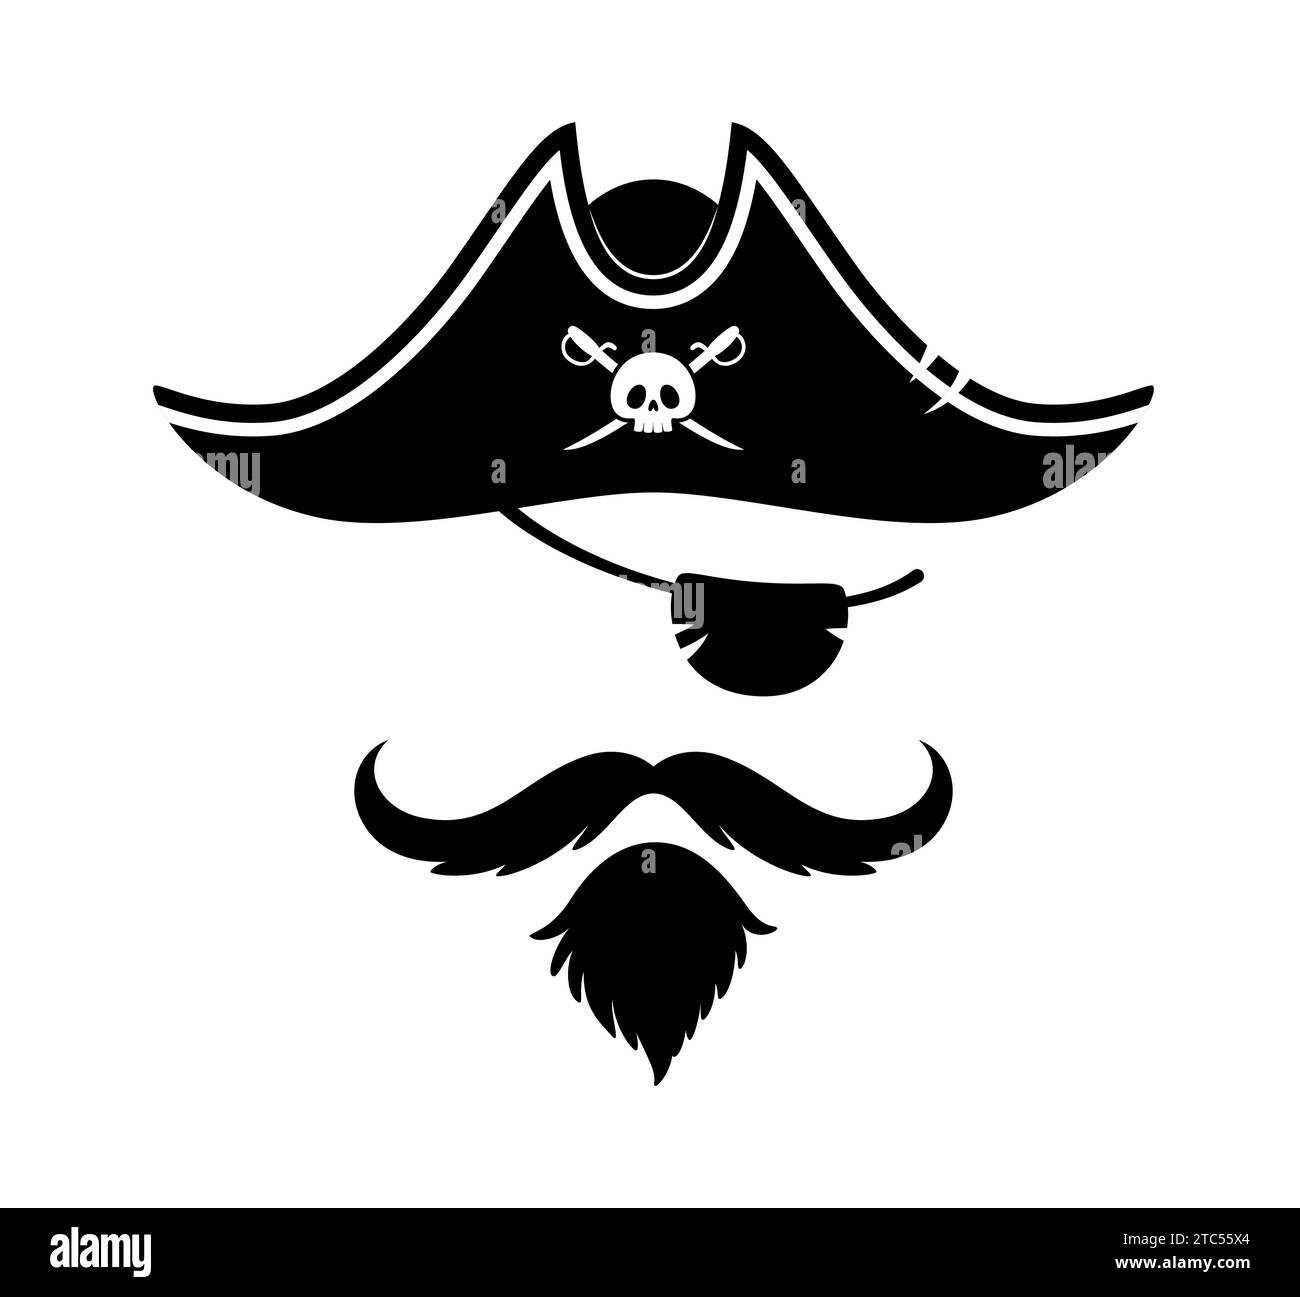 Pirate captain photo booth mask of tricorn and eyepatch, cartoon vector. Caribbean pirate or corsair sailor photo booth face effect mask of captain hat with skull and crossbones, eyepatch and beard Stock Vector